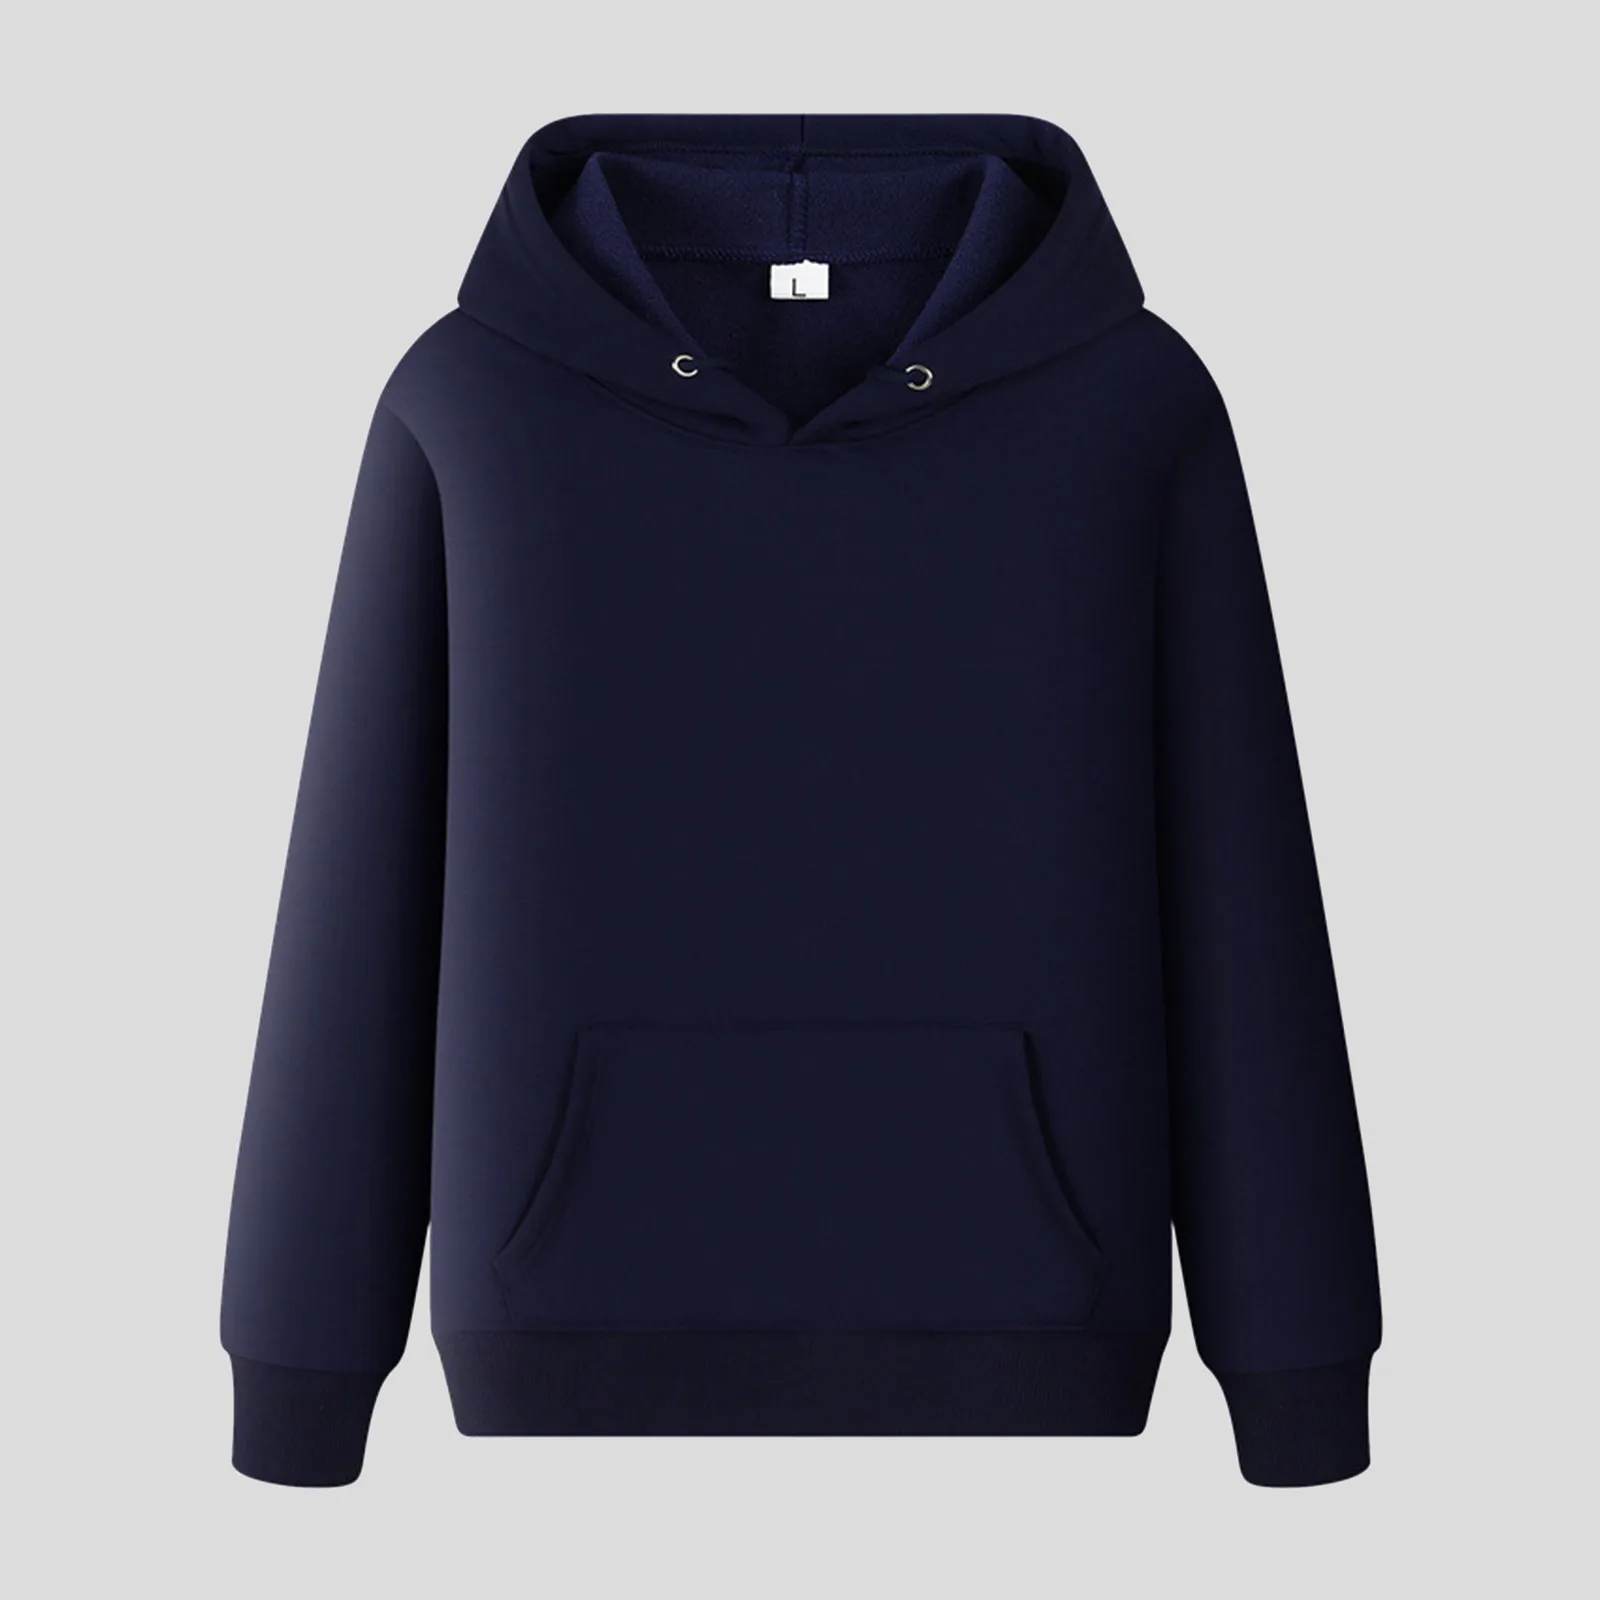 

Plain Drawstring Hoodies Baggy Leisure All-Match Basic Sweatshi Top Jogging Exercise Autumn Winter Ins Pullovers Men'S Sudaderas